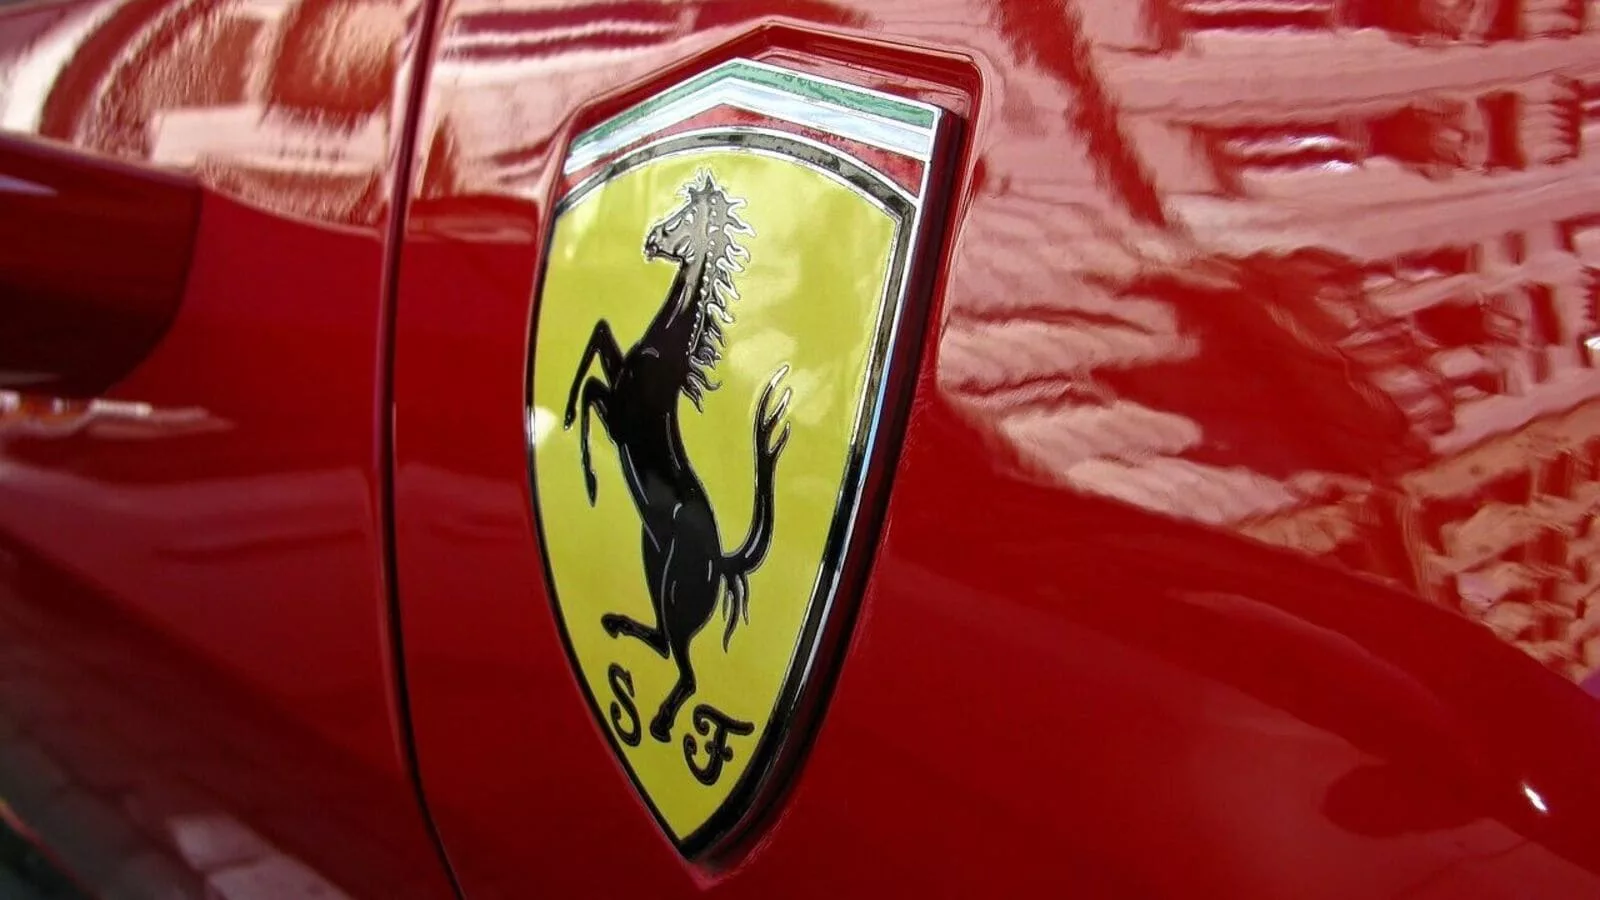 This Ferrari technology allows for flexible driving position. Here’s how